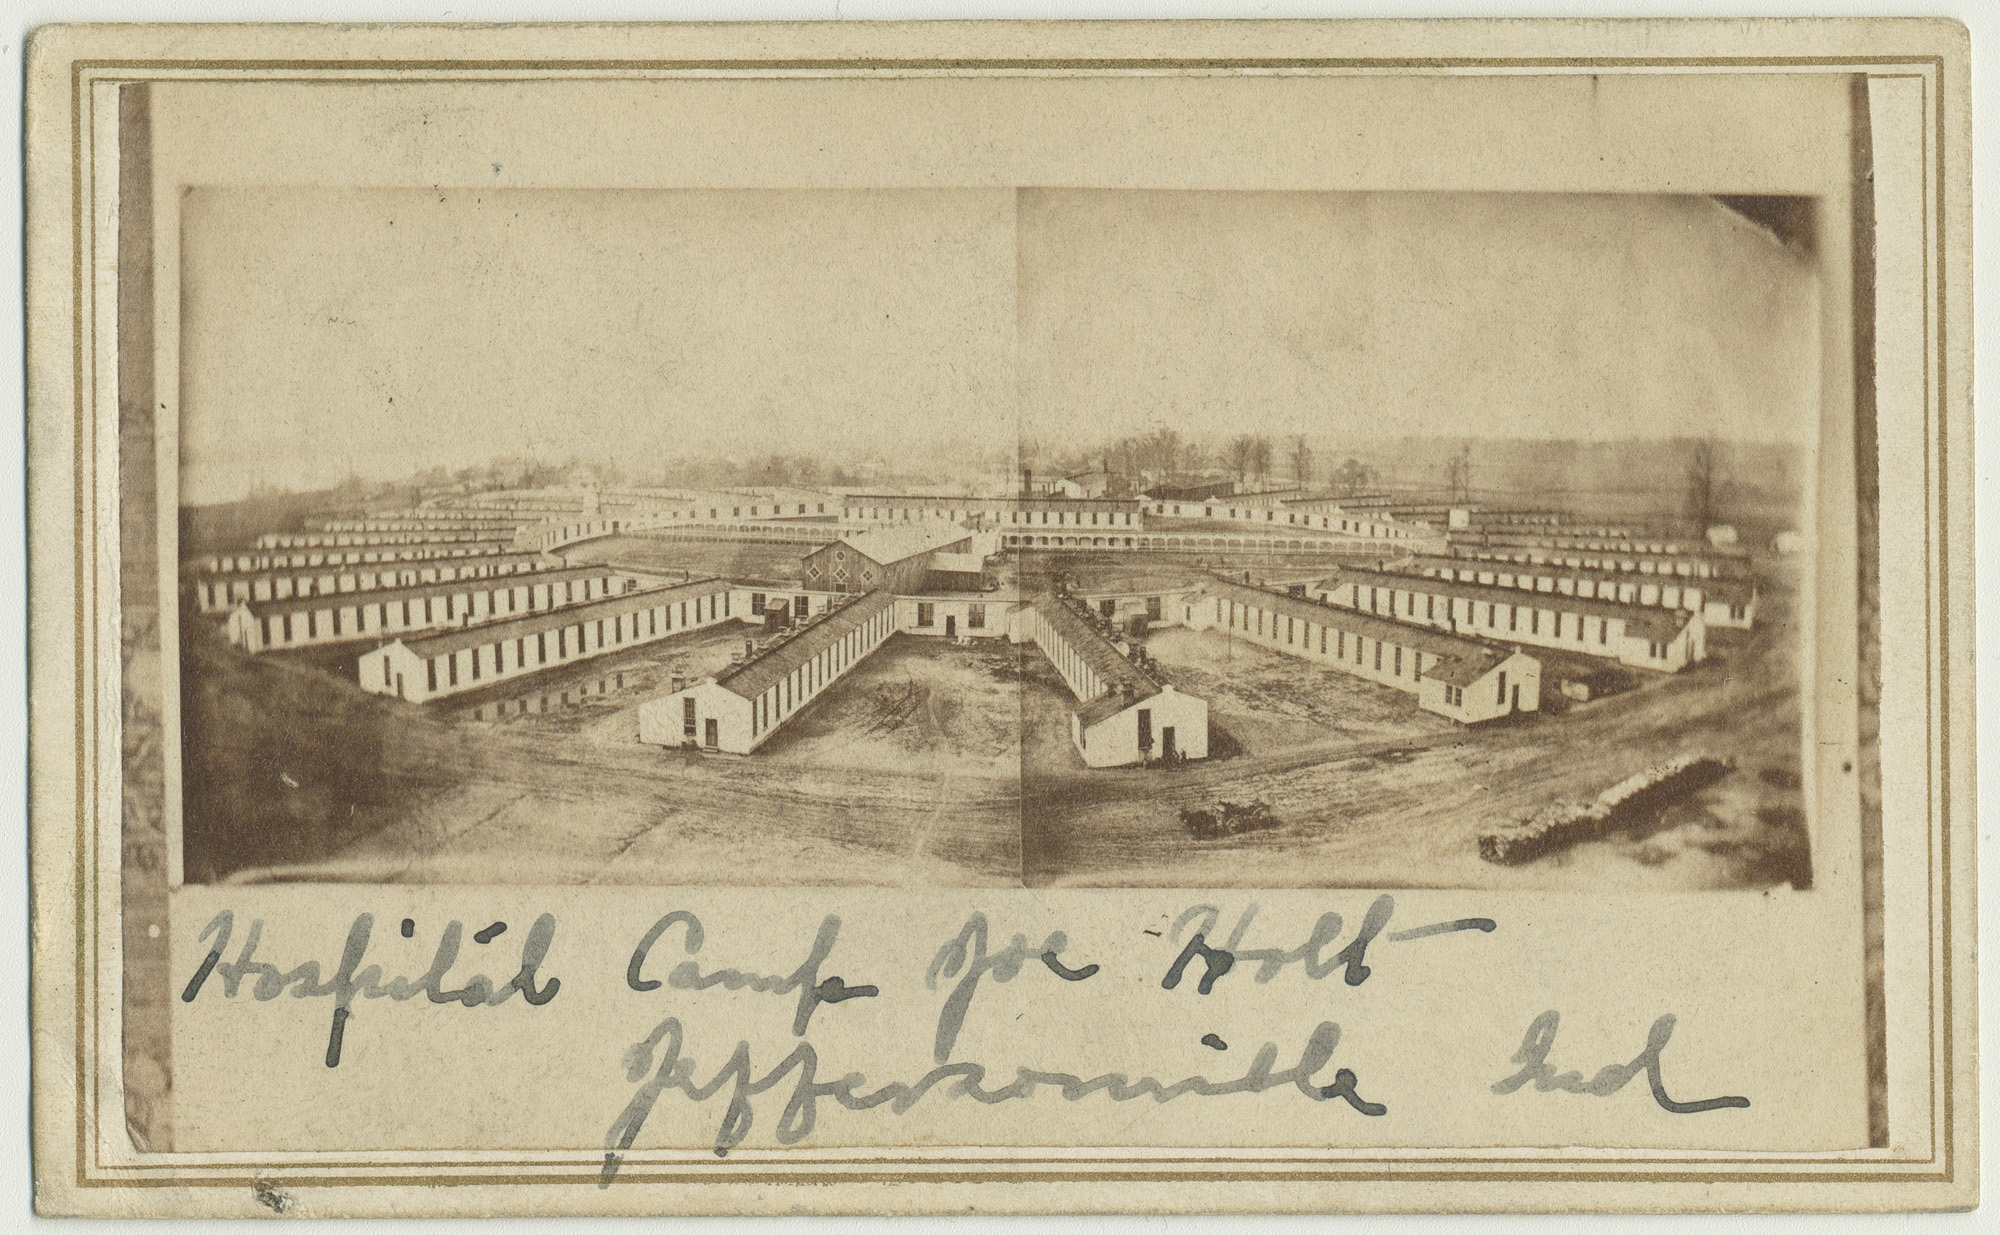 Hospital Camp in Jeffersonville, Indiana, c. 1864-1866, photograph, carte-de-visite 2½ x 4 inches (Chicago History Museum)